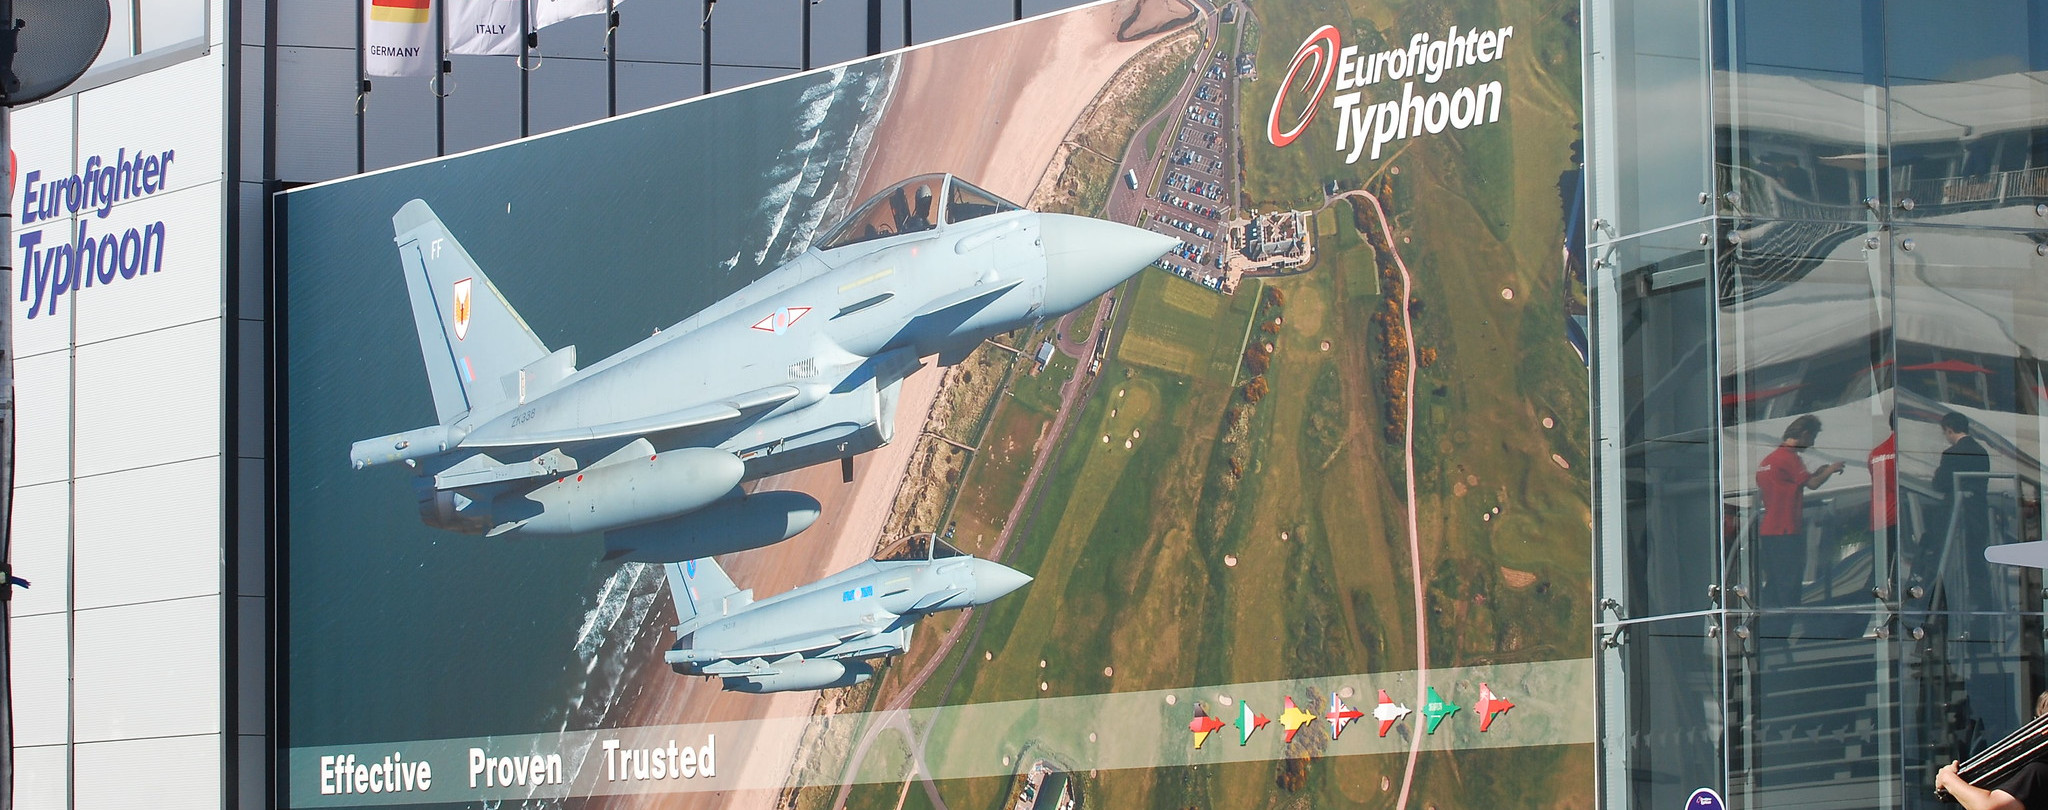 Huge digital display pictures warplanes flying from above with the ground below, and the words Eurofighter Typhoon